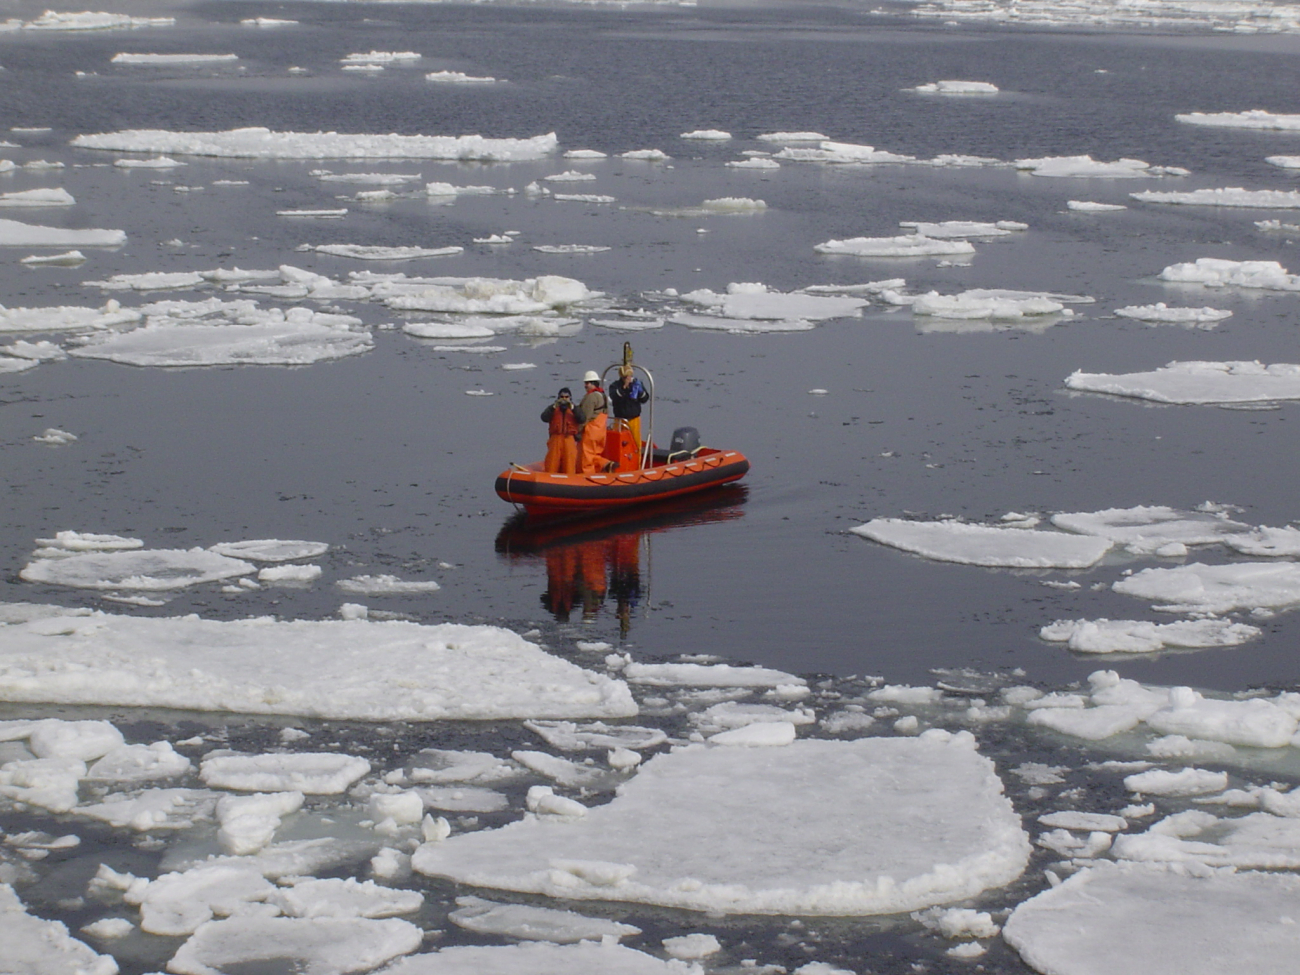 NOAA Ship MILLER FREEMAN rigid hull inflatable boat in the ice of theBering Sea